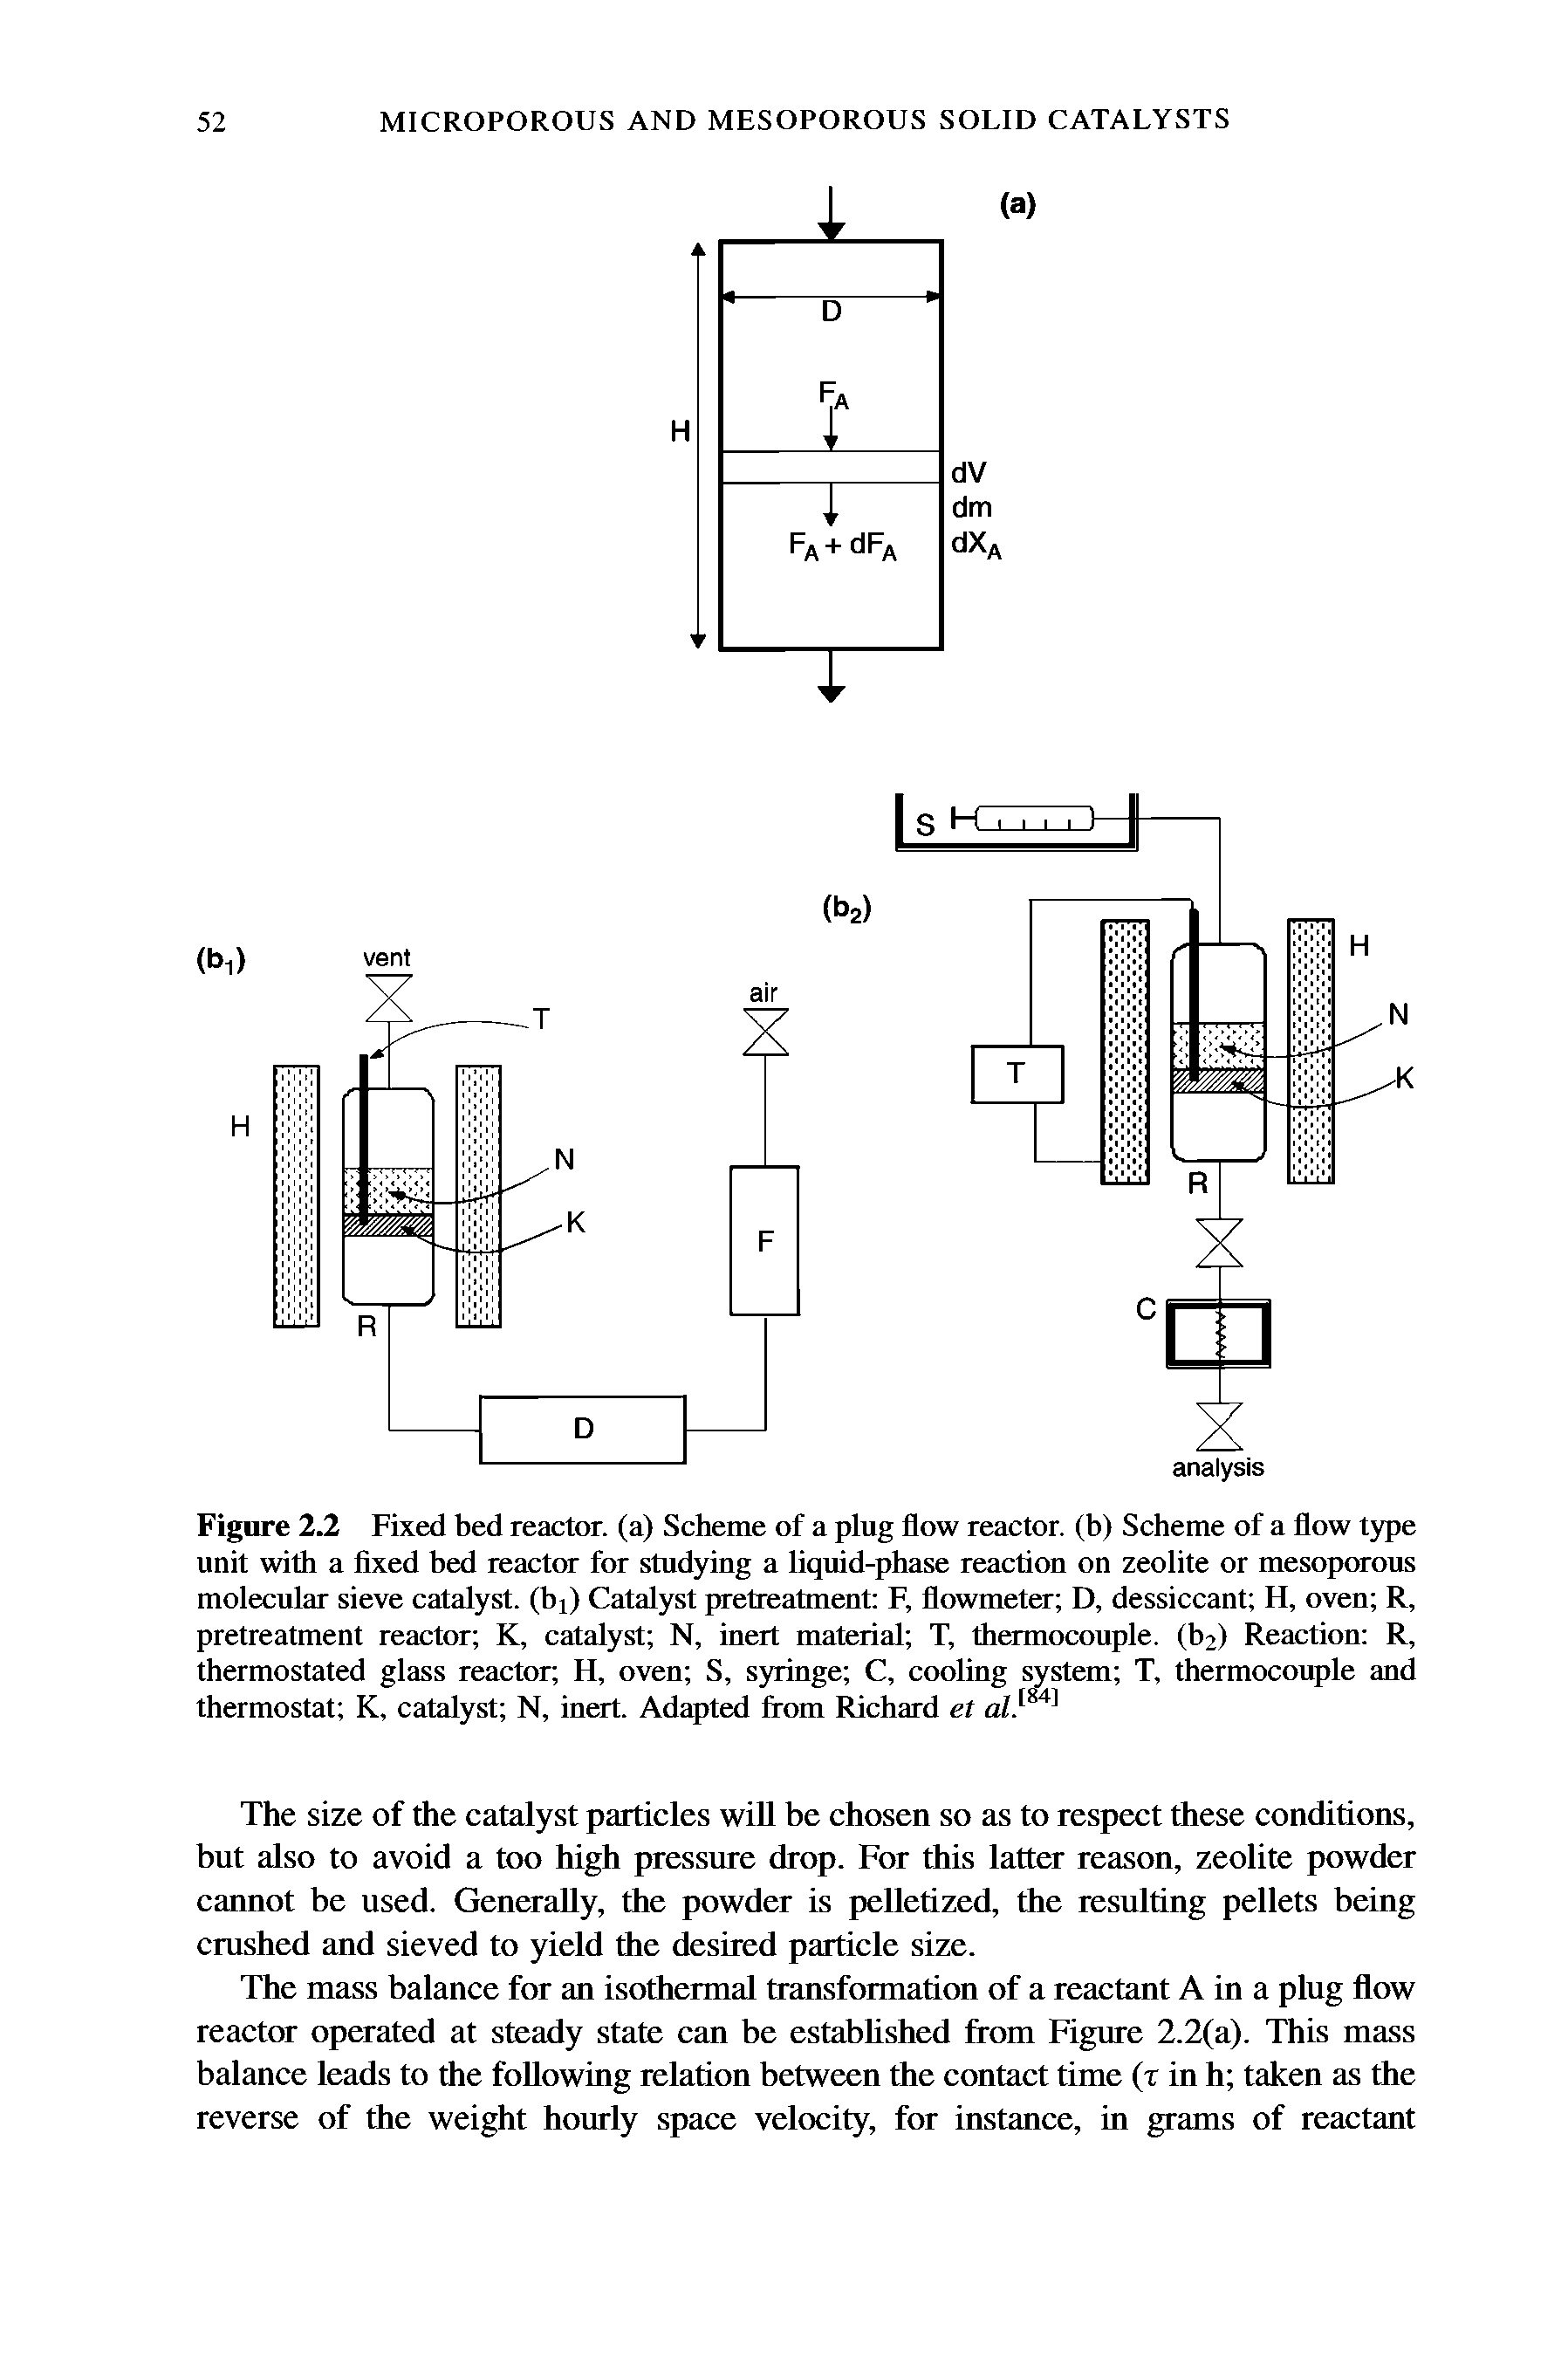 Figure 2.2 Fixed bed reactor, (a) Scheme of a plug flow reactor, (b) Scheme of a flow type unit with a fixed bed reactor for studying a liquid-phase reaction on zeolite or mesoporous molecular sieve catalyst, (hi) Catalyst pretreatment F, flowmeter D, dessiccant H, oven R, pretreatment reactor K, catalyst N, inert material T, thermocouple. (b2) Reaction R, thermostated glass reactor H, oven S, syringe C, cooling system T, thermocouple and thermostat K, catalyst N, inert. Adapted from Richard et al.